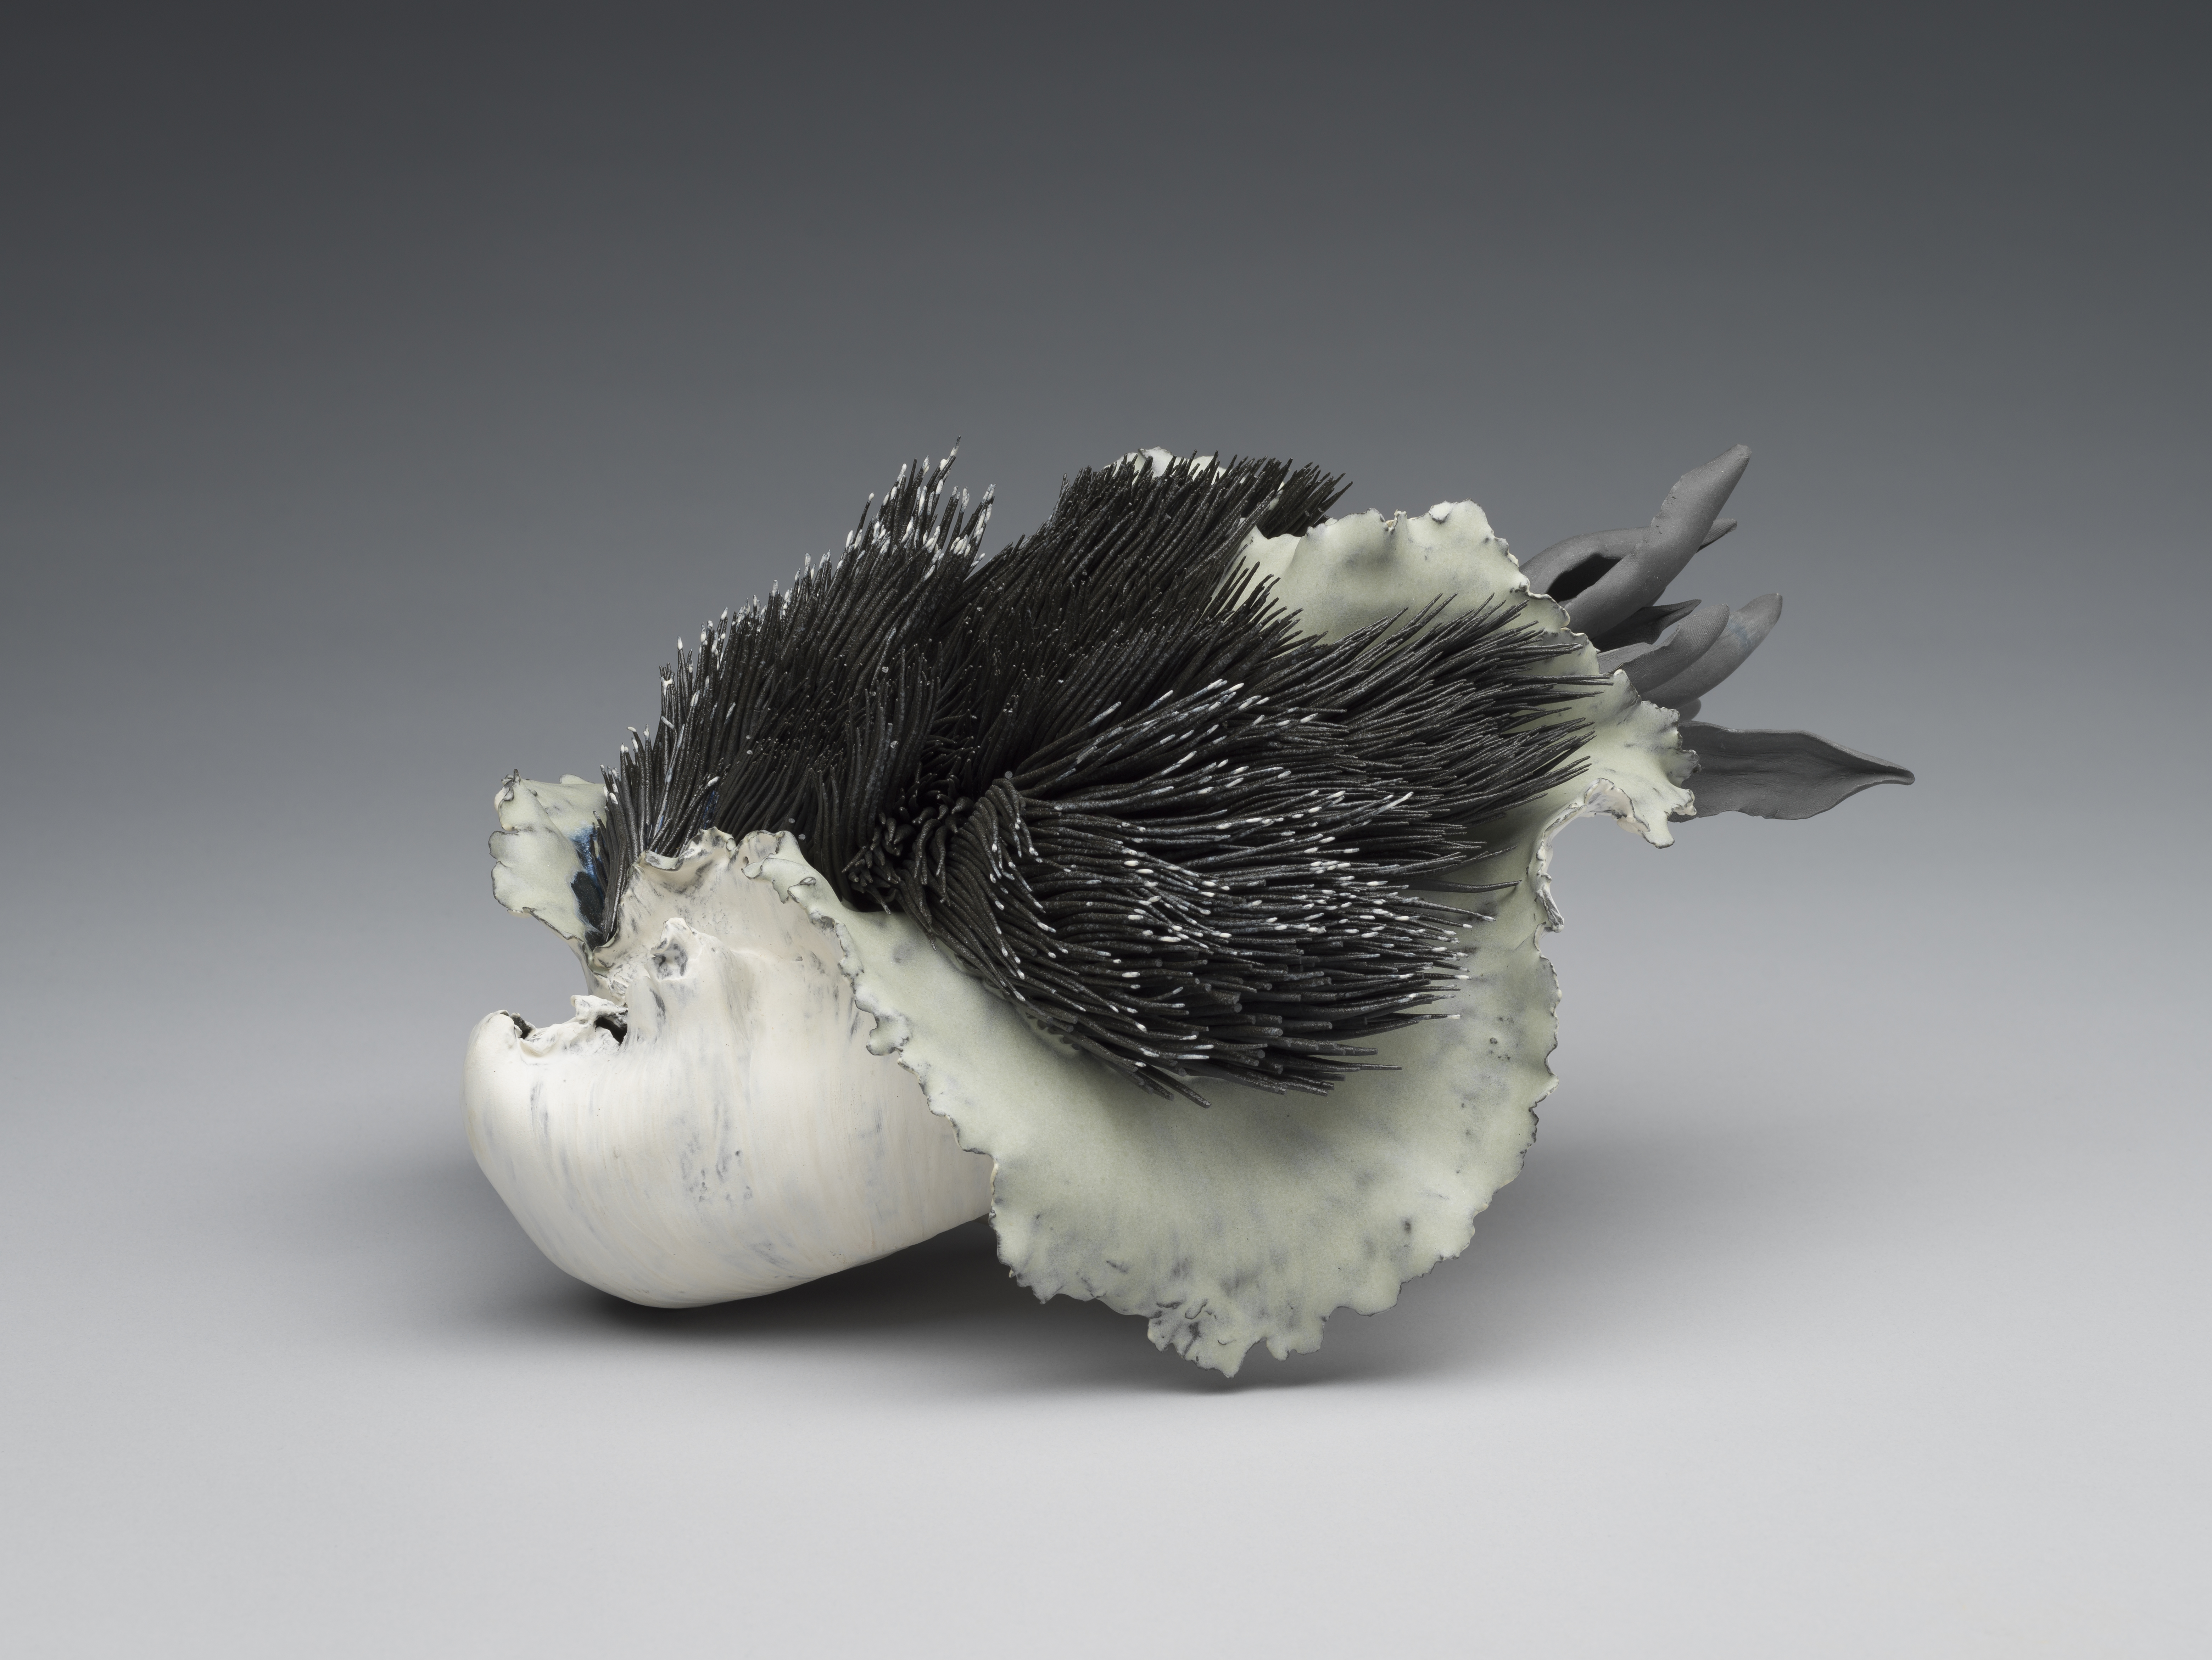 Shingu Sayaka's Flower Sculpture, a glazed sculpture of flowing white petals surrounding hundreds of black, coral like stems seemingly blowing in the wind